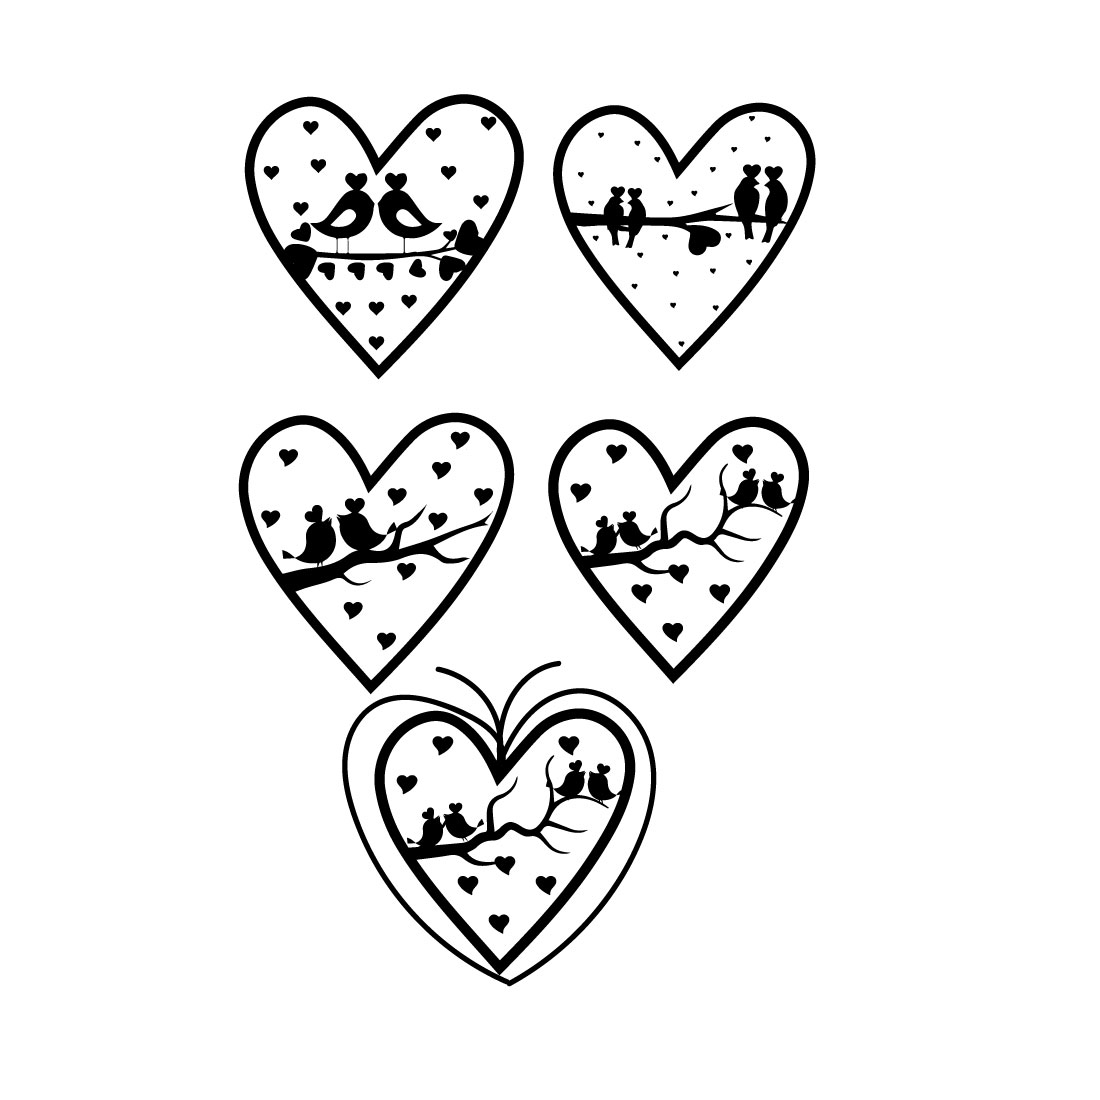 Four hearts with birds in the middle of them.